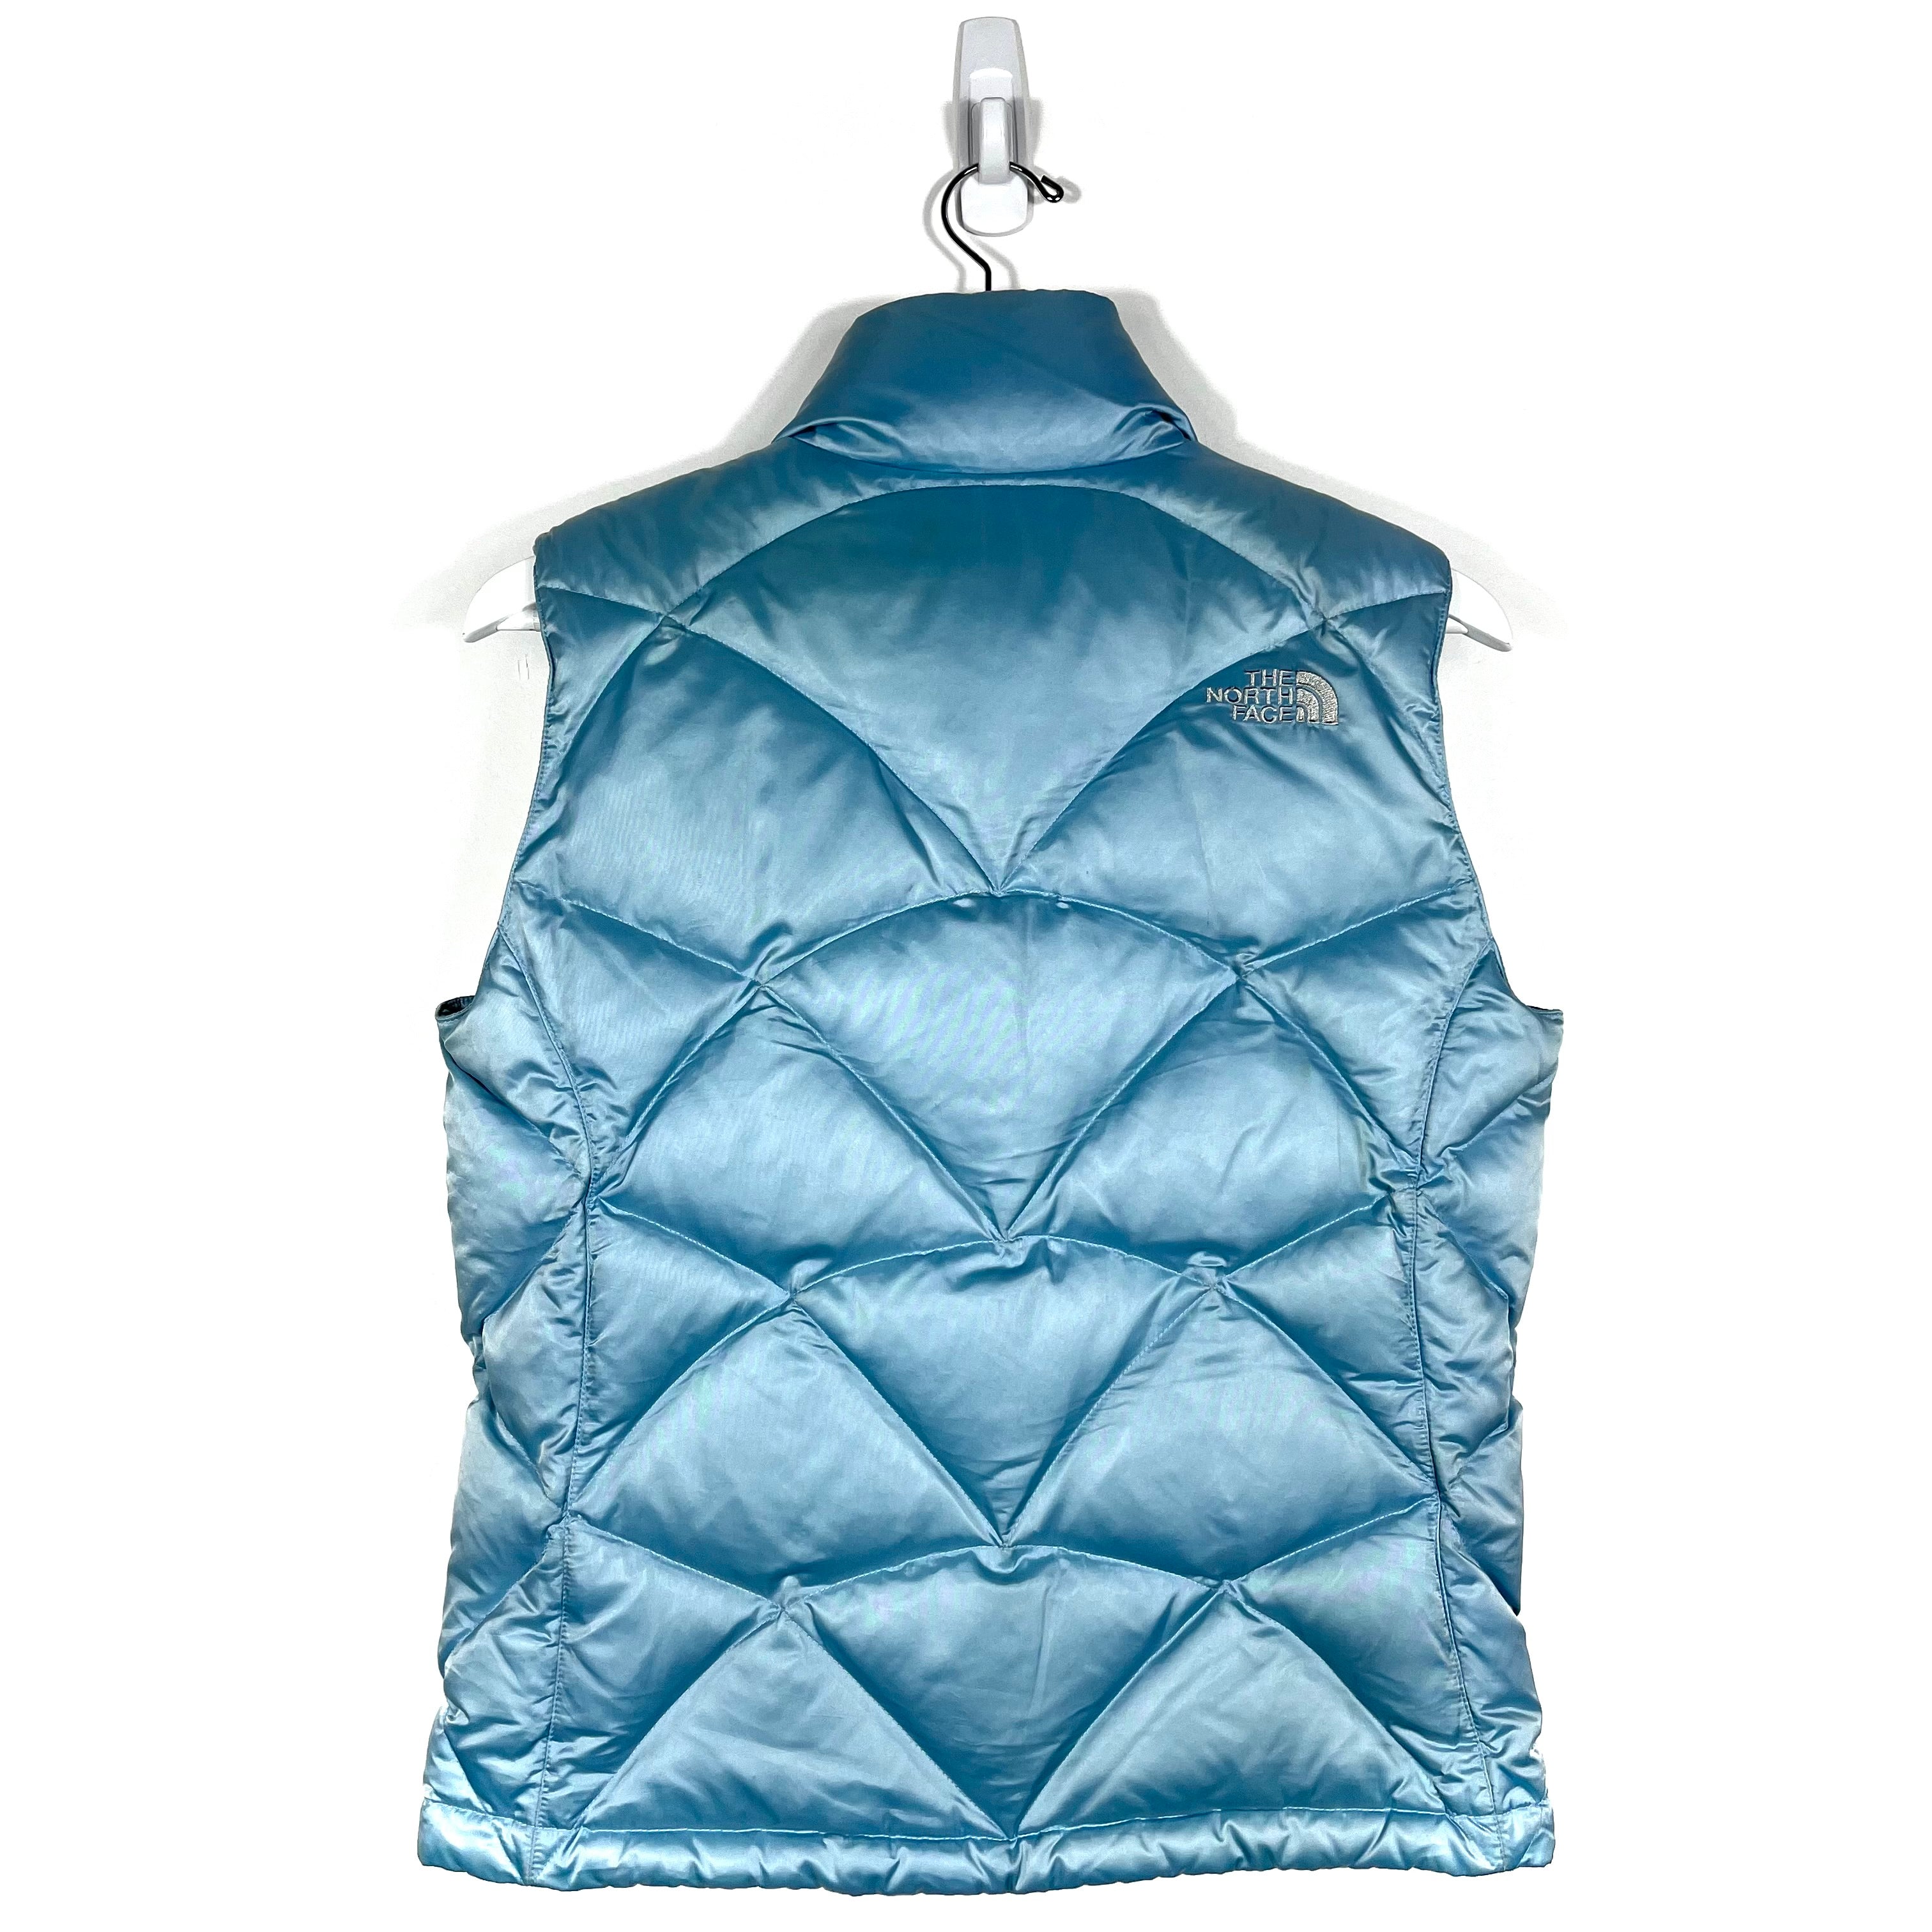 Vintage The North Face 550 Series Puffer Vest - Women's Small